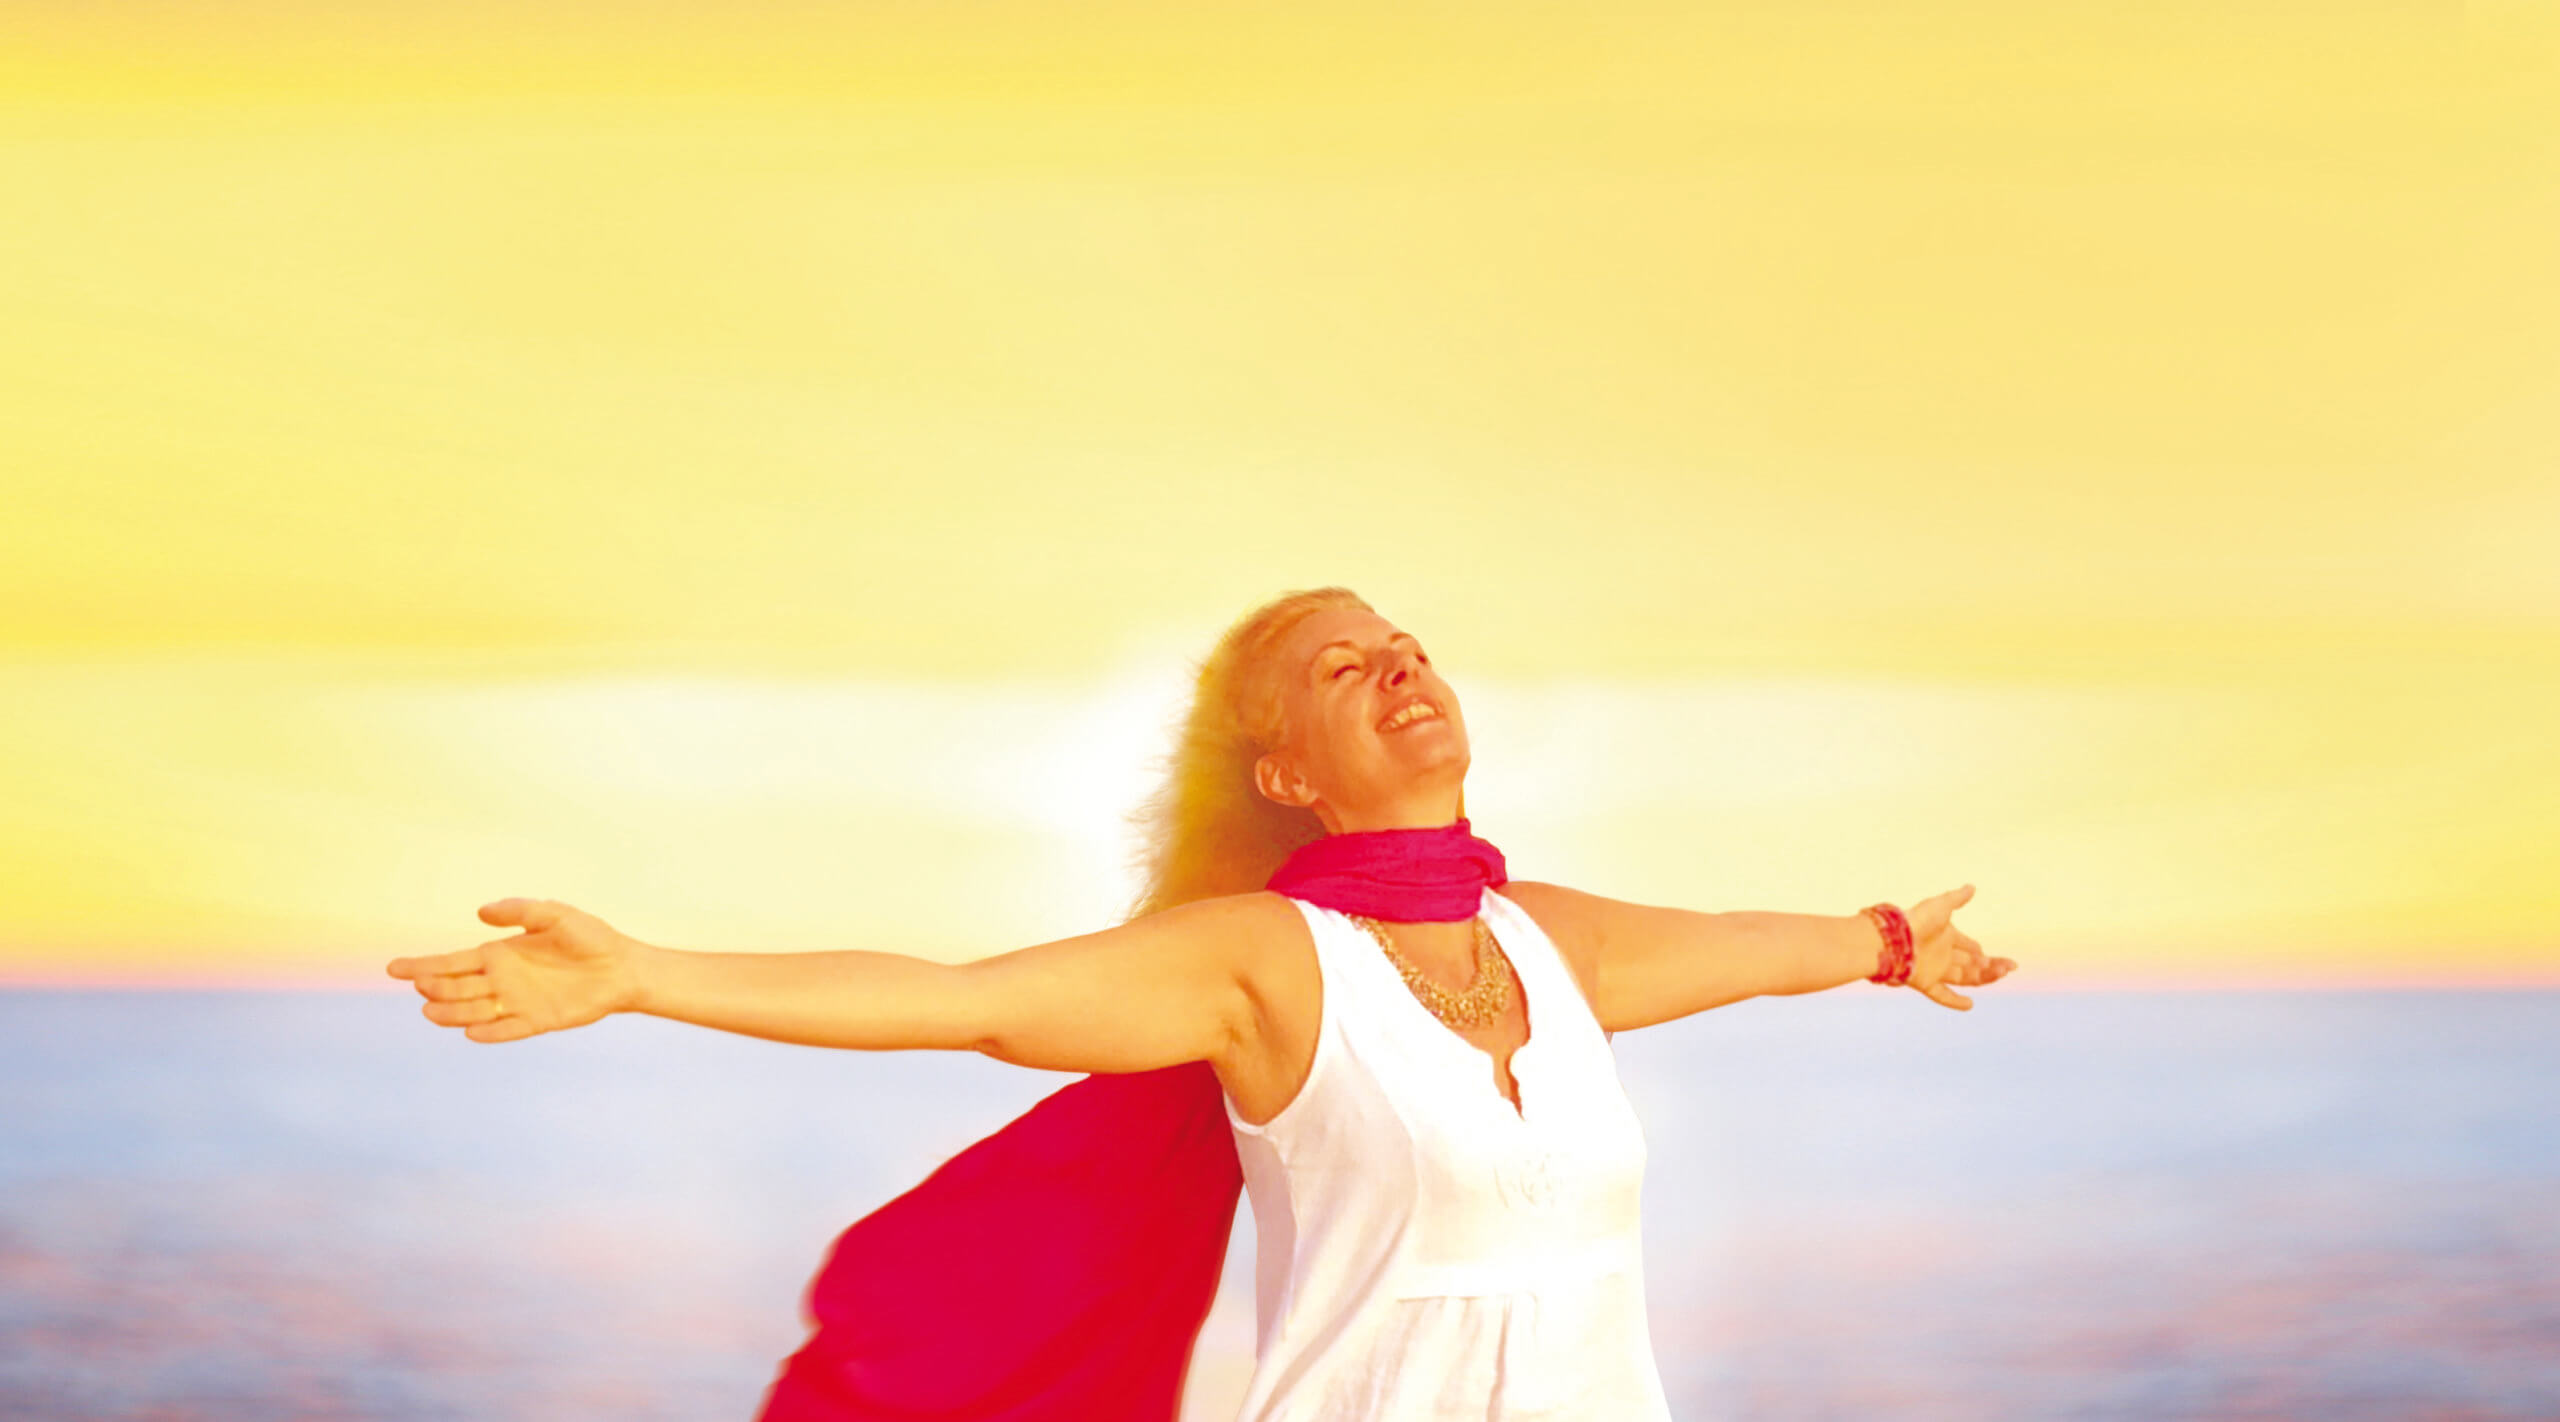 Enjoyment - free happy woman enjoying sunset. Beautiful woman in a white dress embracing the golden sunshine glow of sunset with her arms outspread and face raised to the sky enjoying peace and serenity of nature